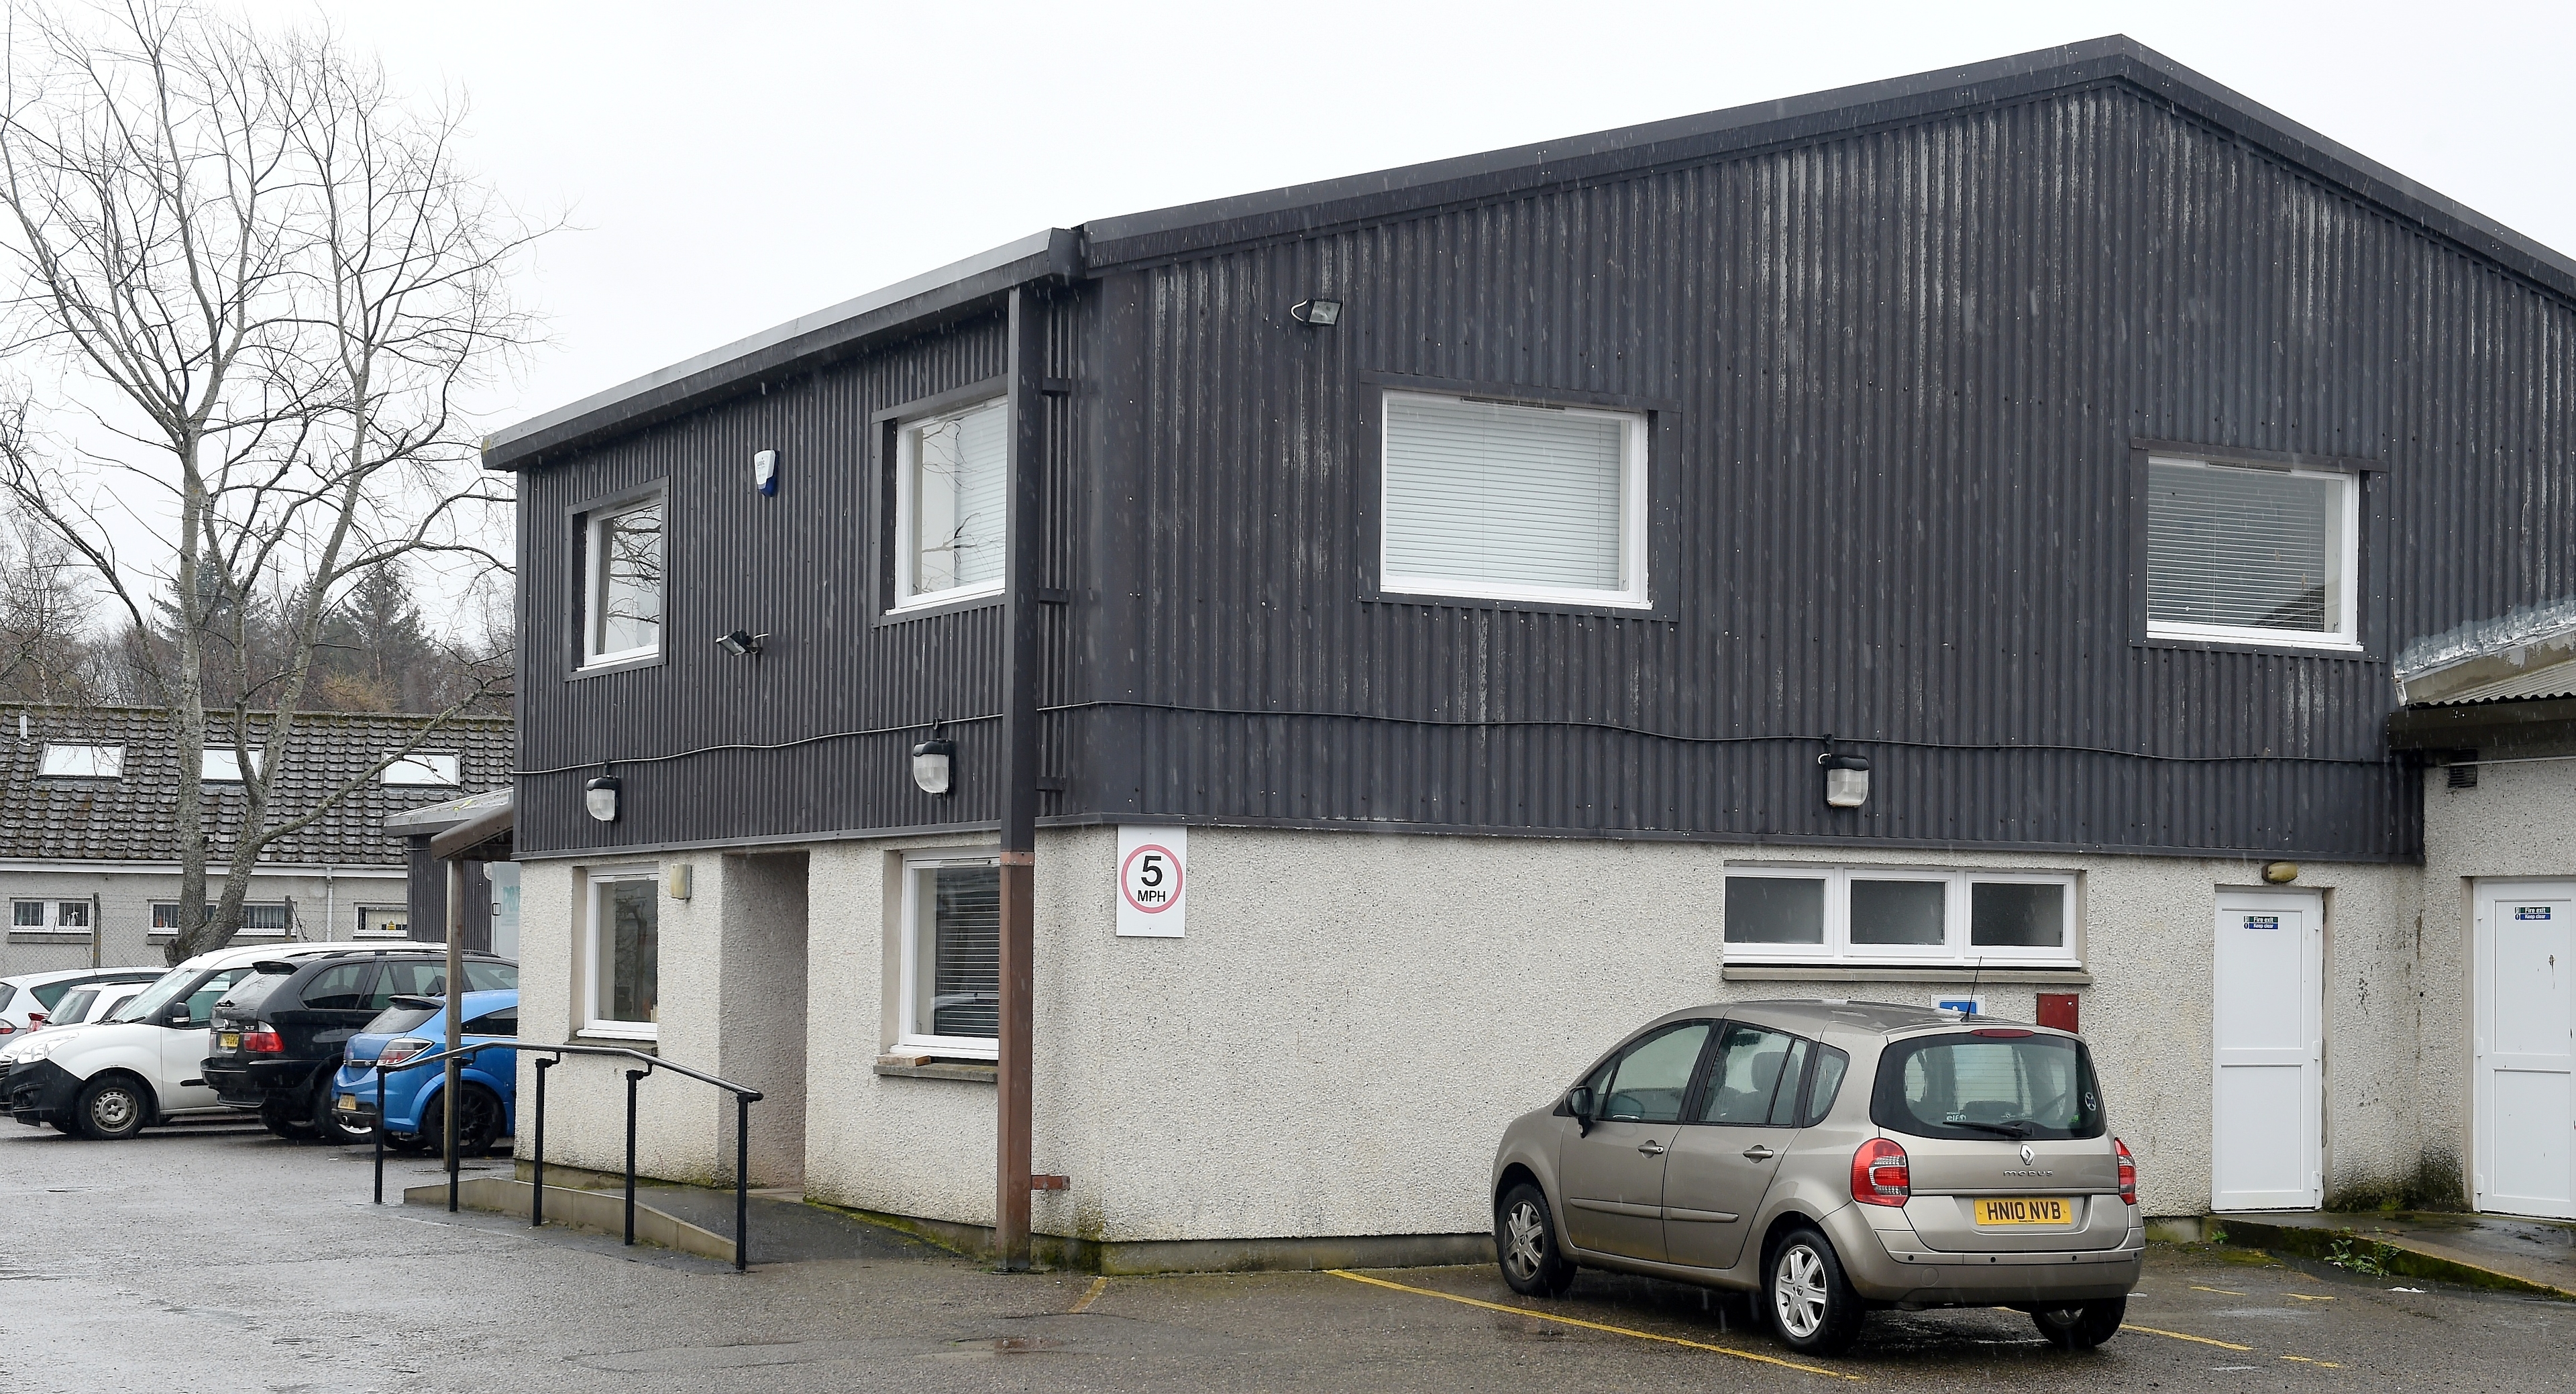 The Building Maintenance Depot of the Highland Council Housing and Property Services Department in Alness.